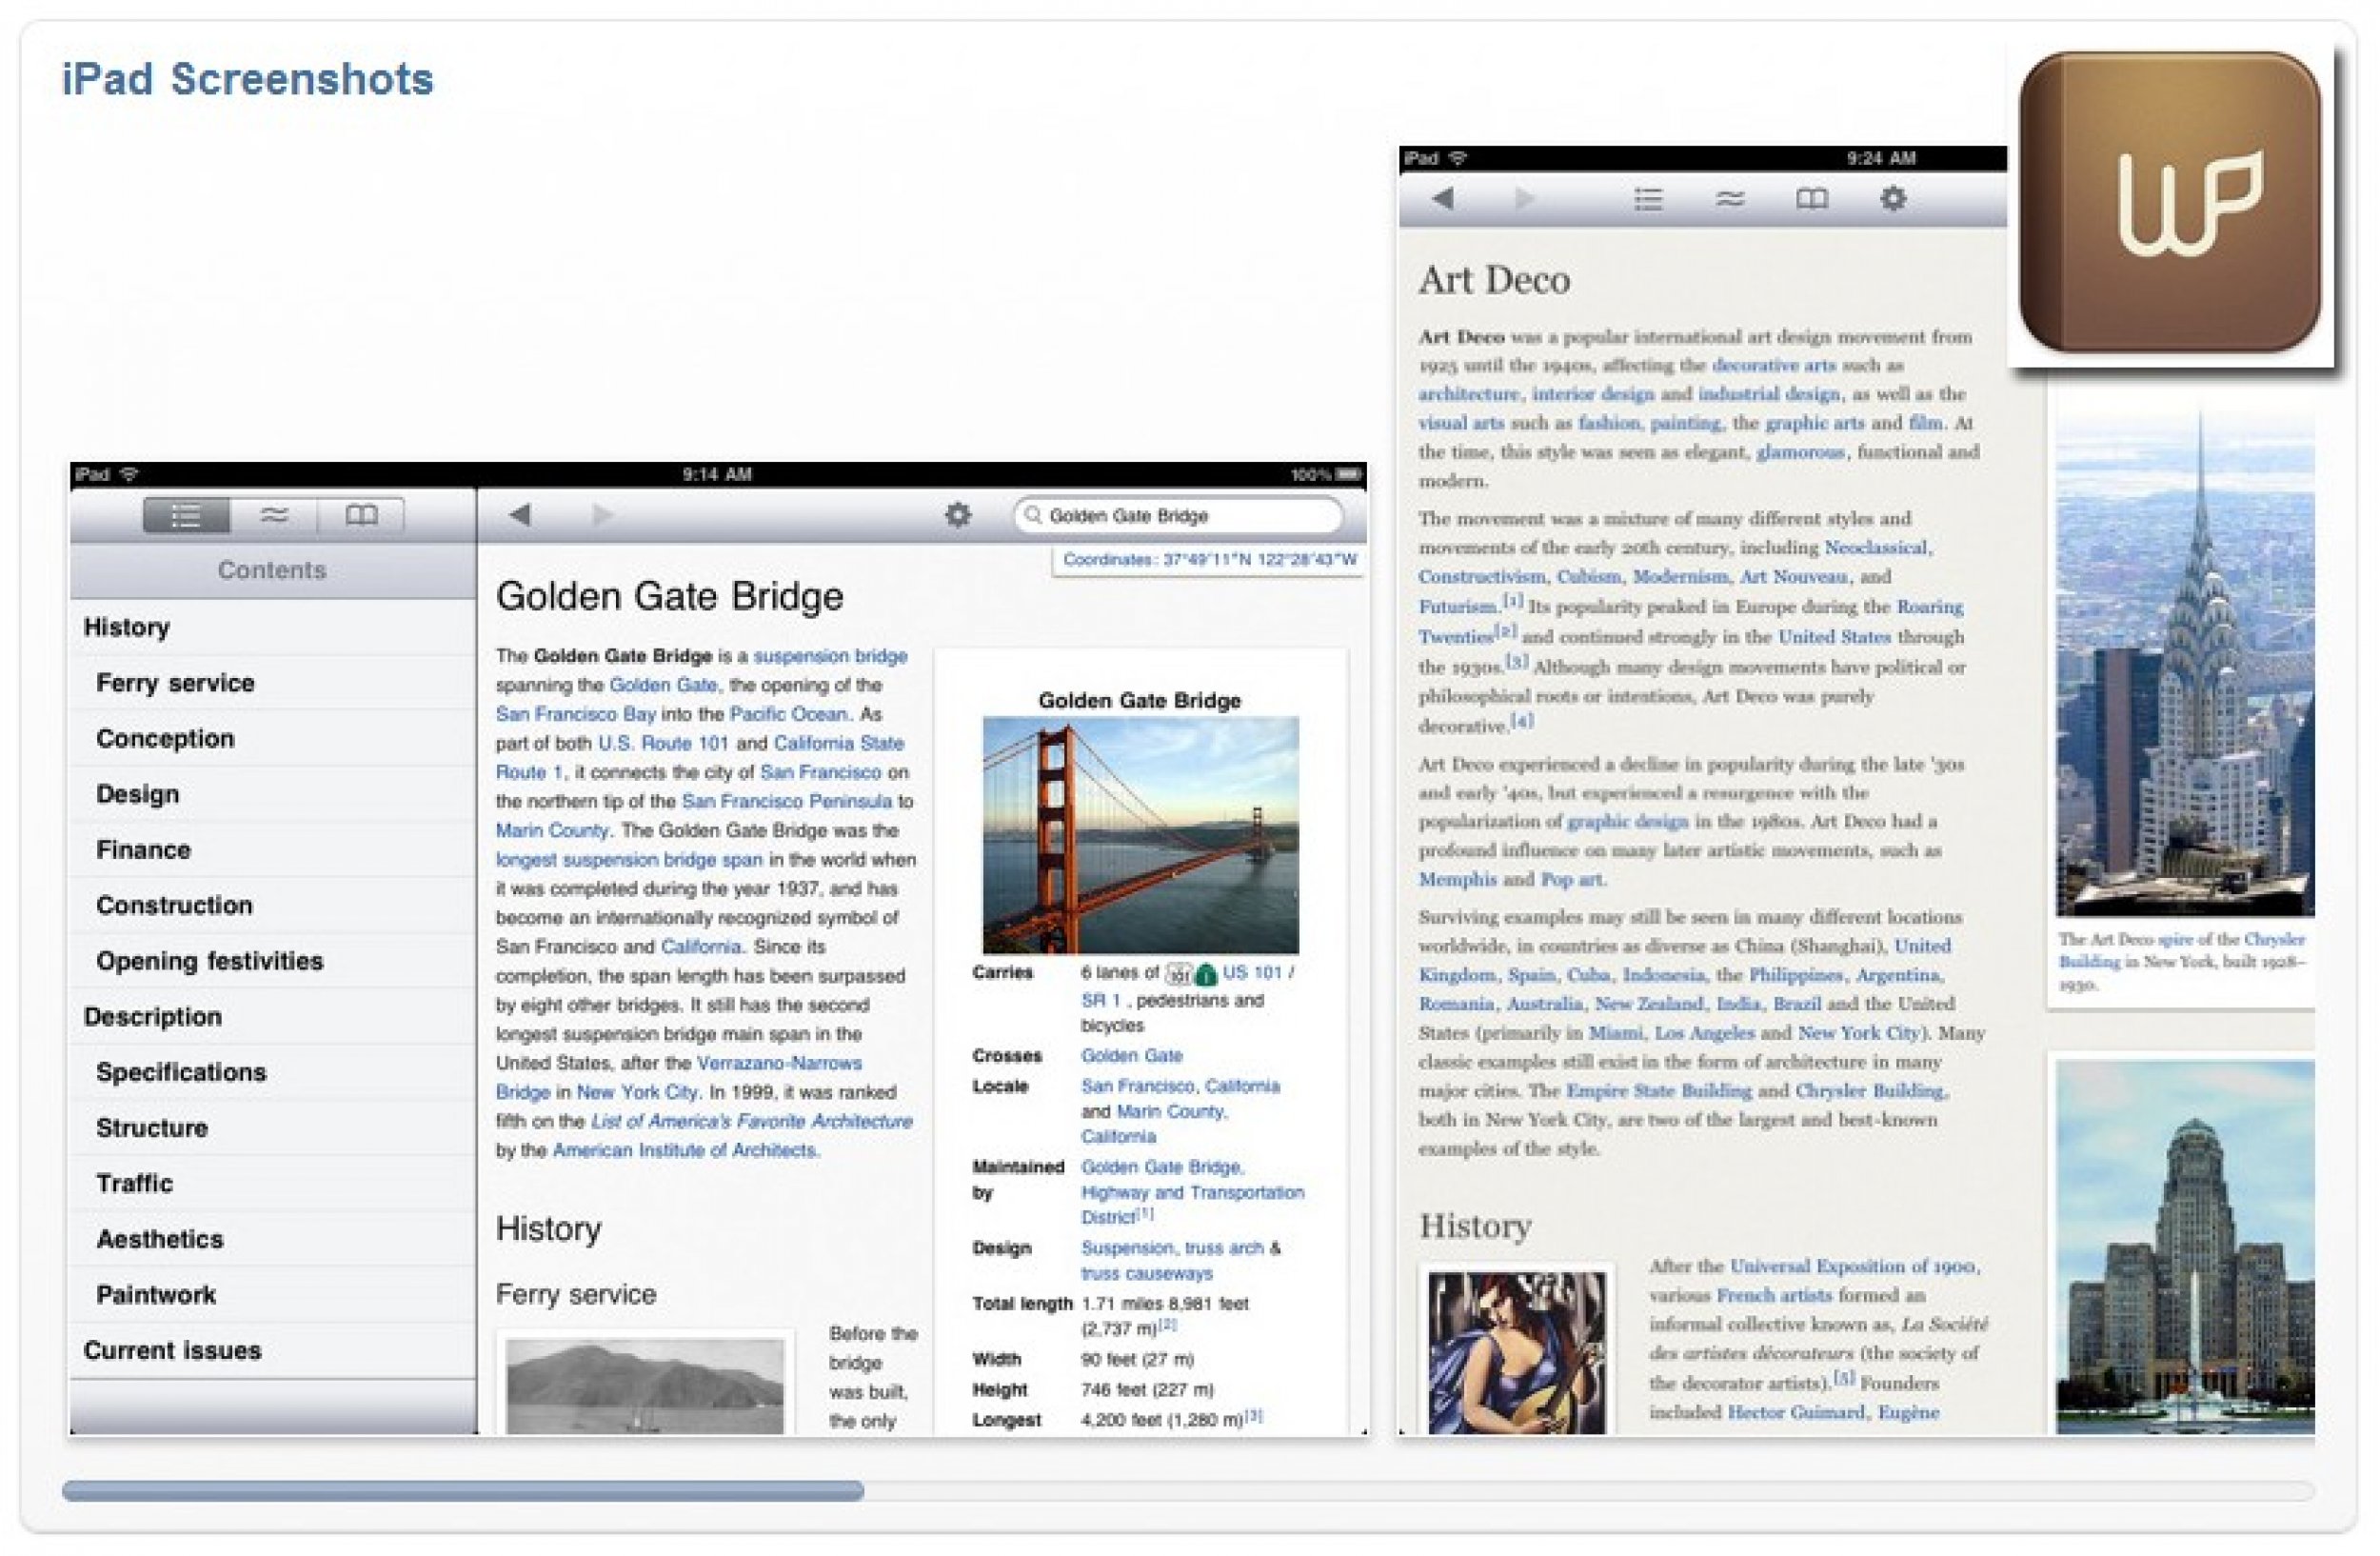 Wikipanion Reference - Top 50 must-have iPad apps